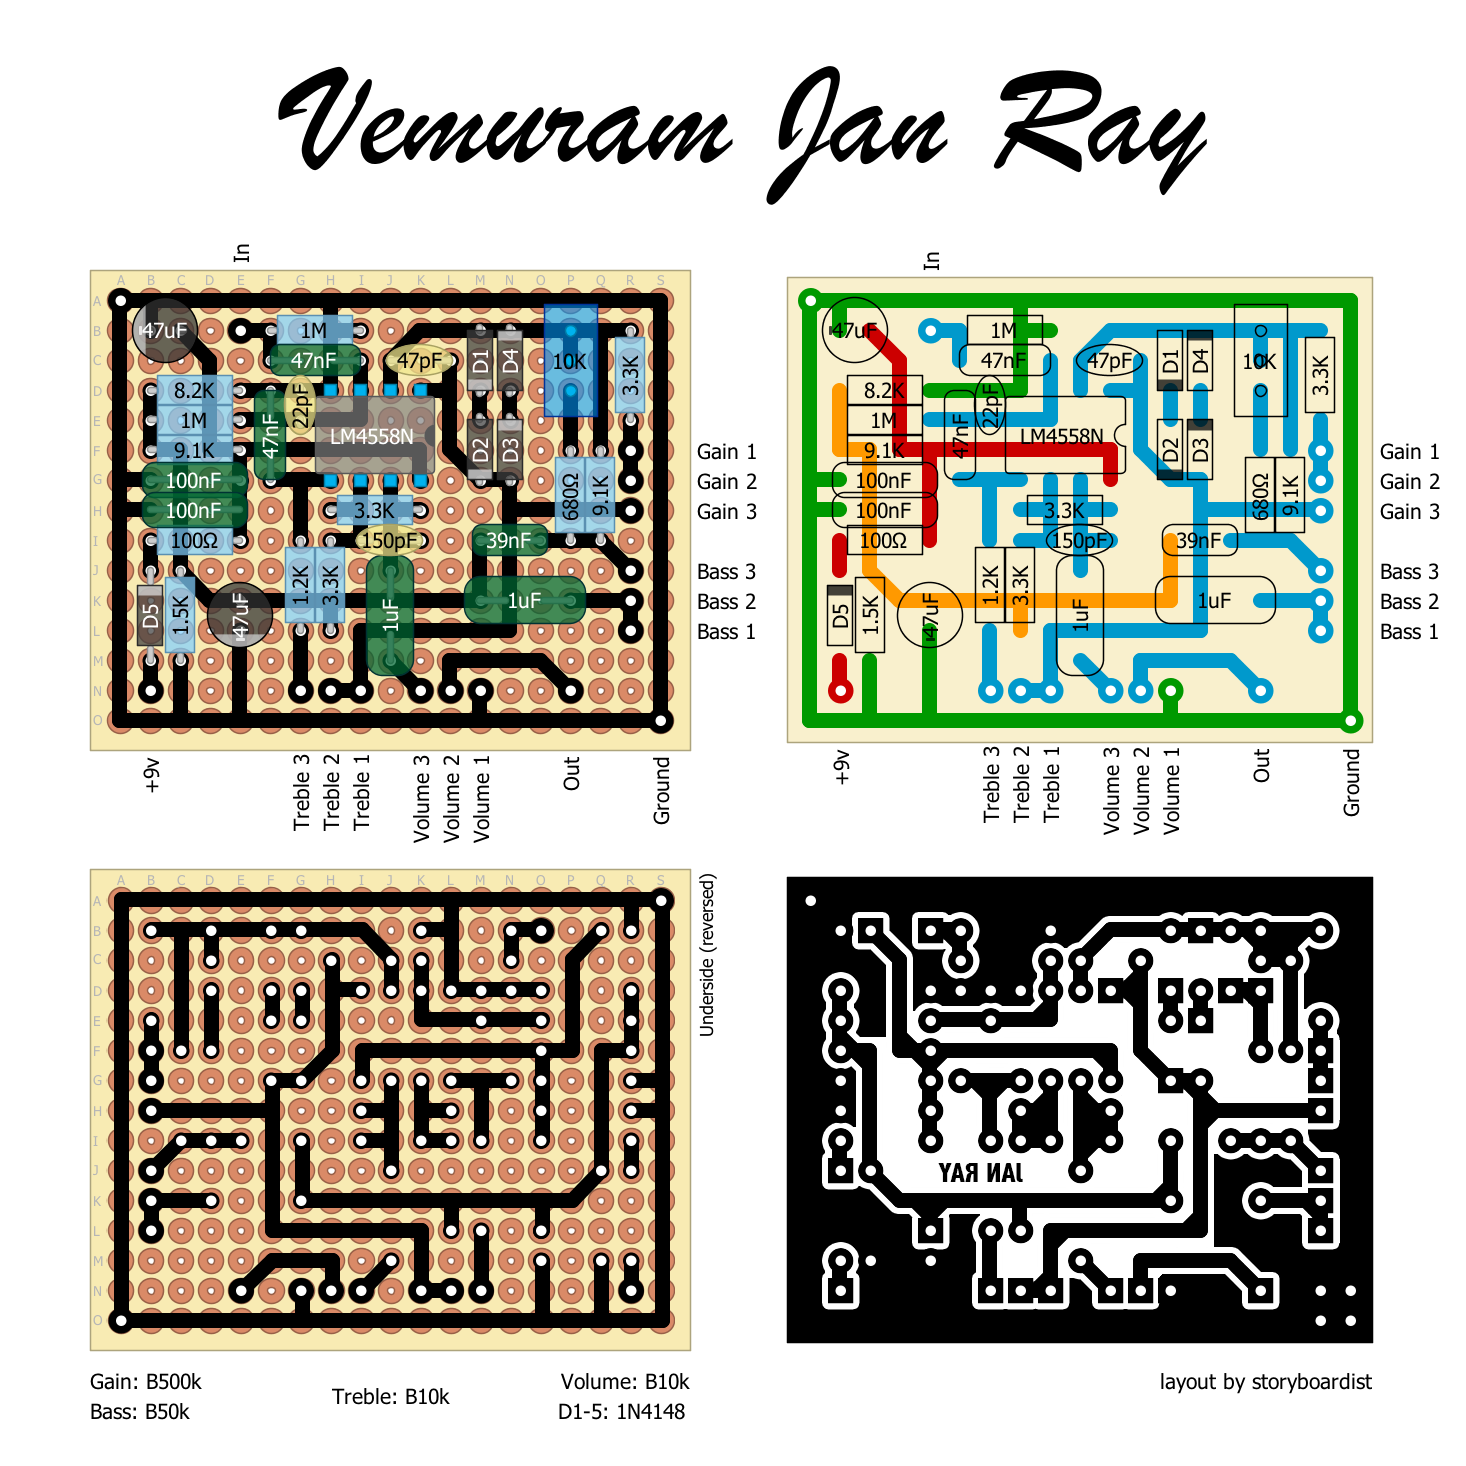 Perf and PCB Effects Layouts: Vemuram Jan Ray